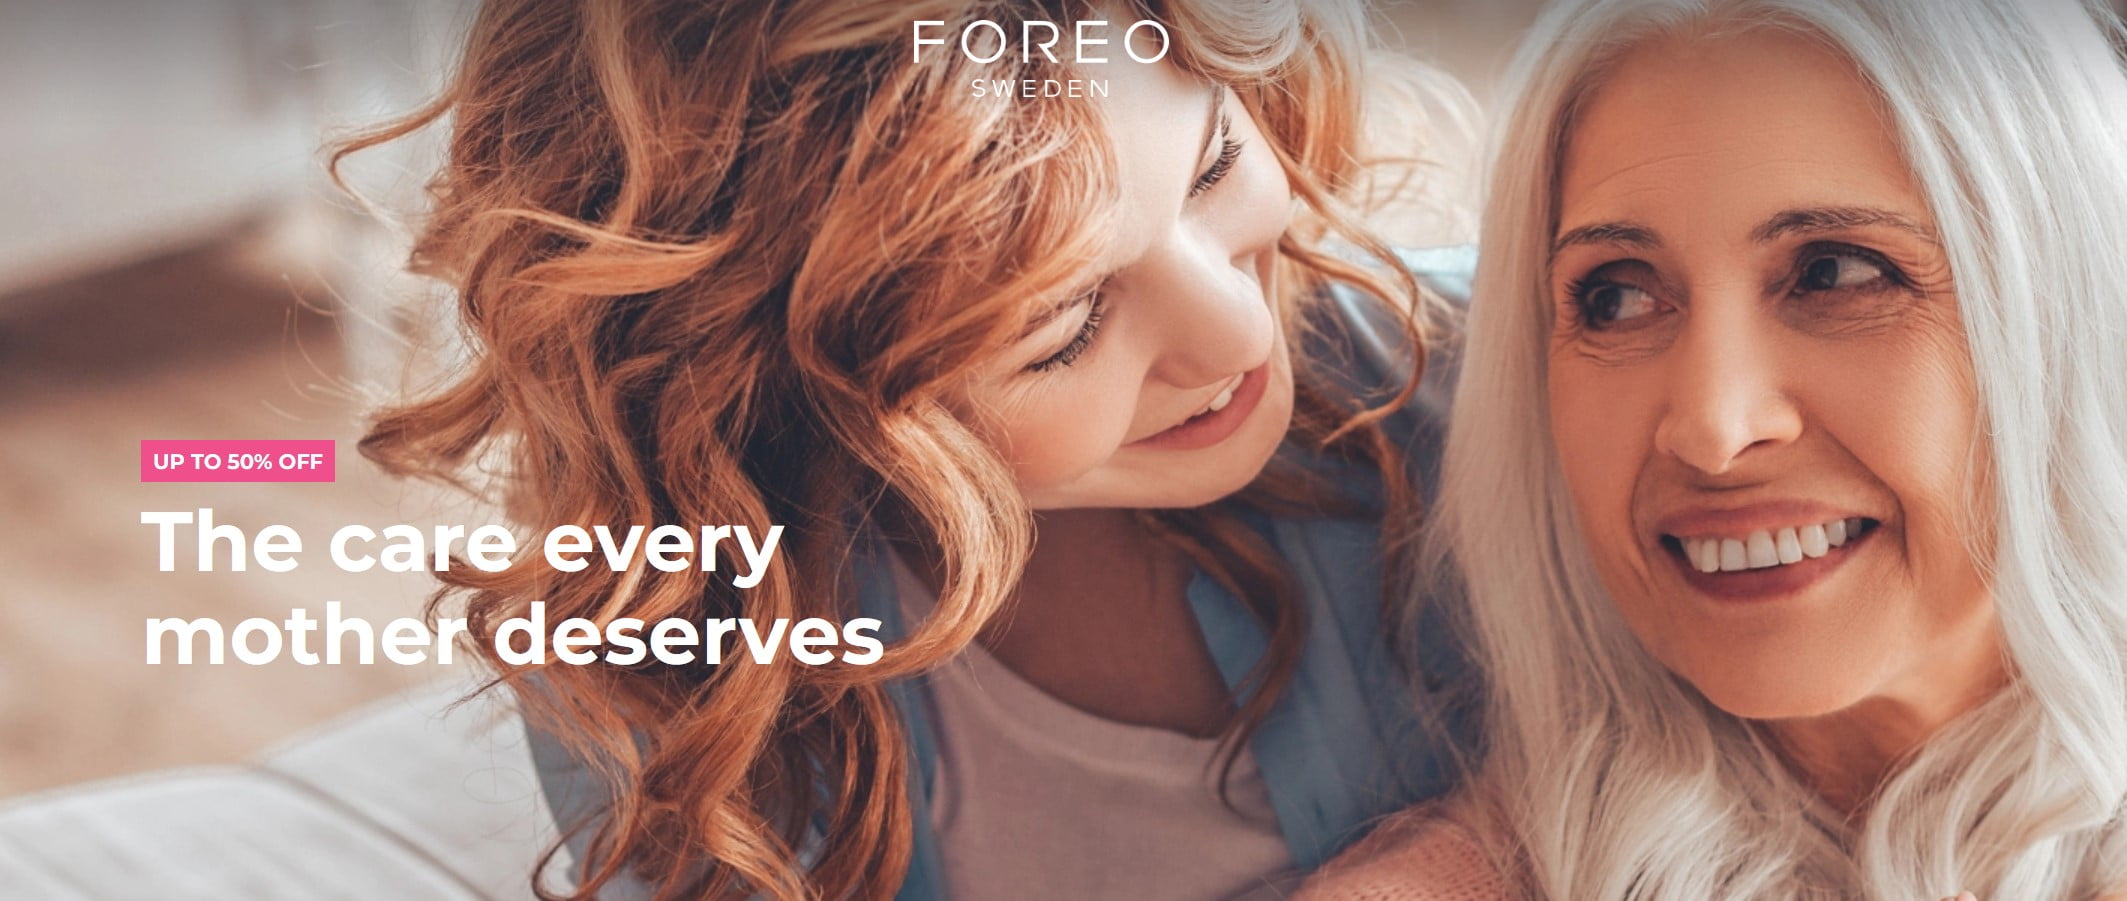 Up to 50% off sale at Foreo